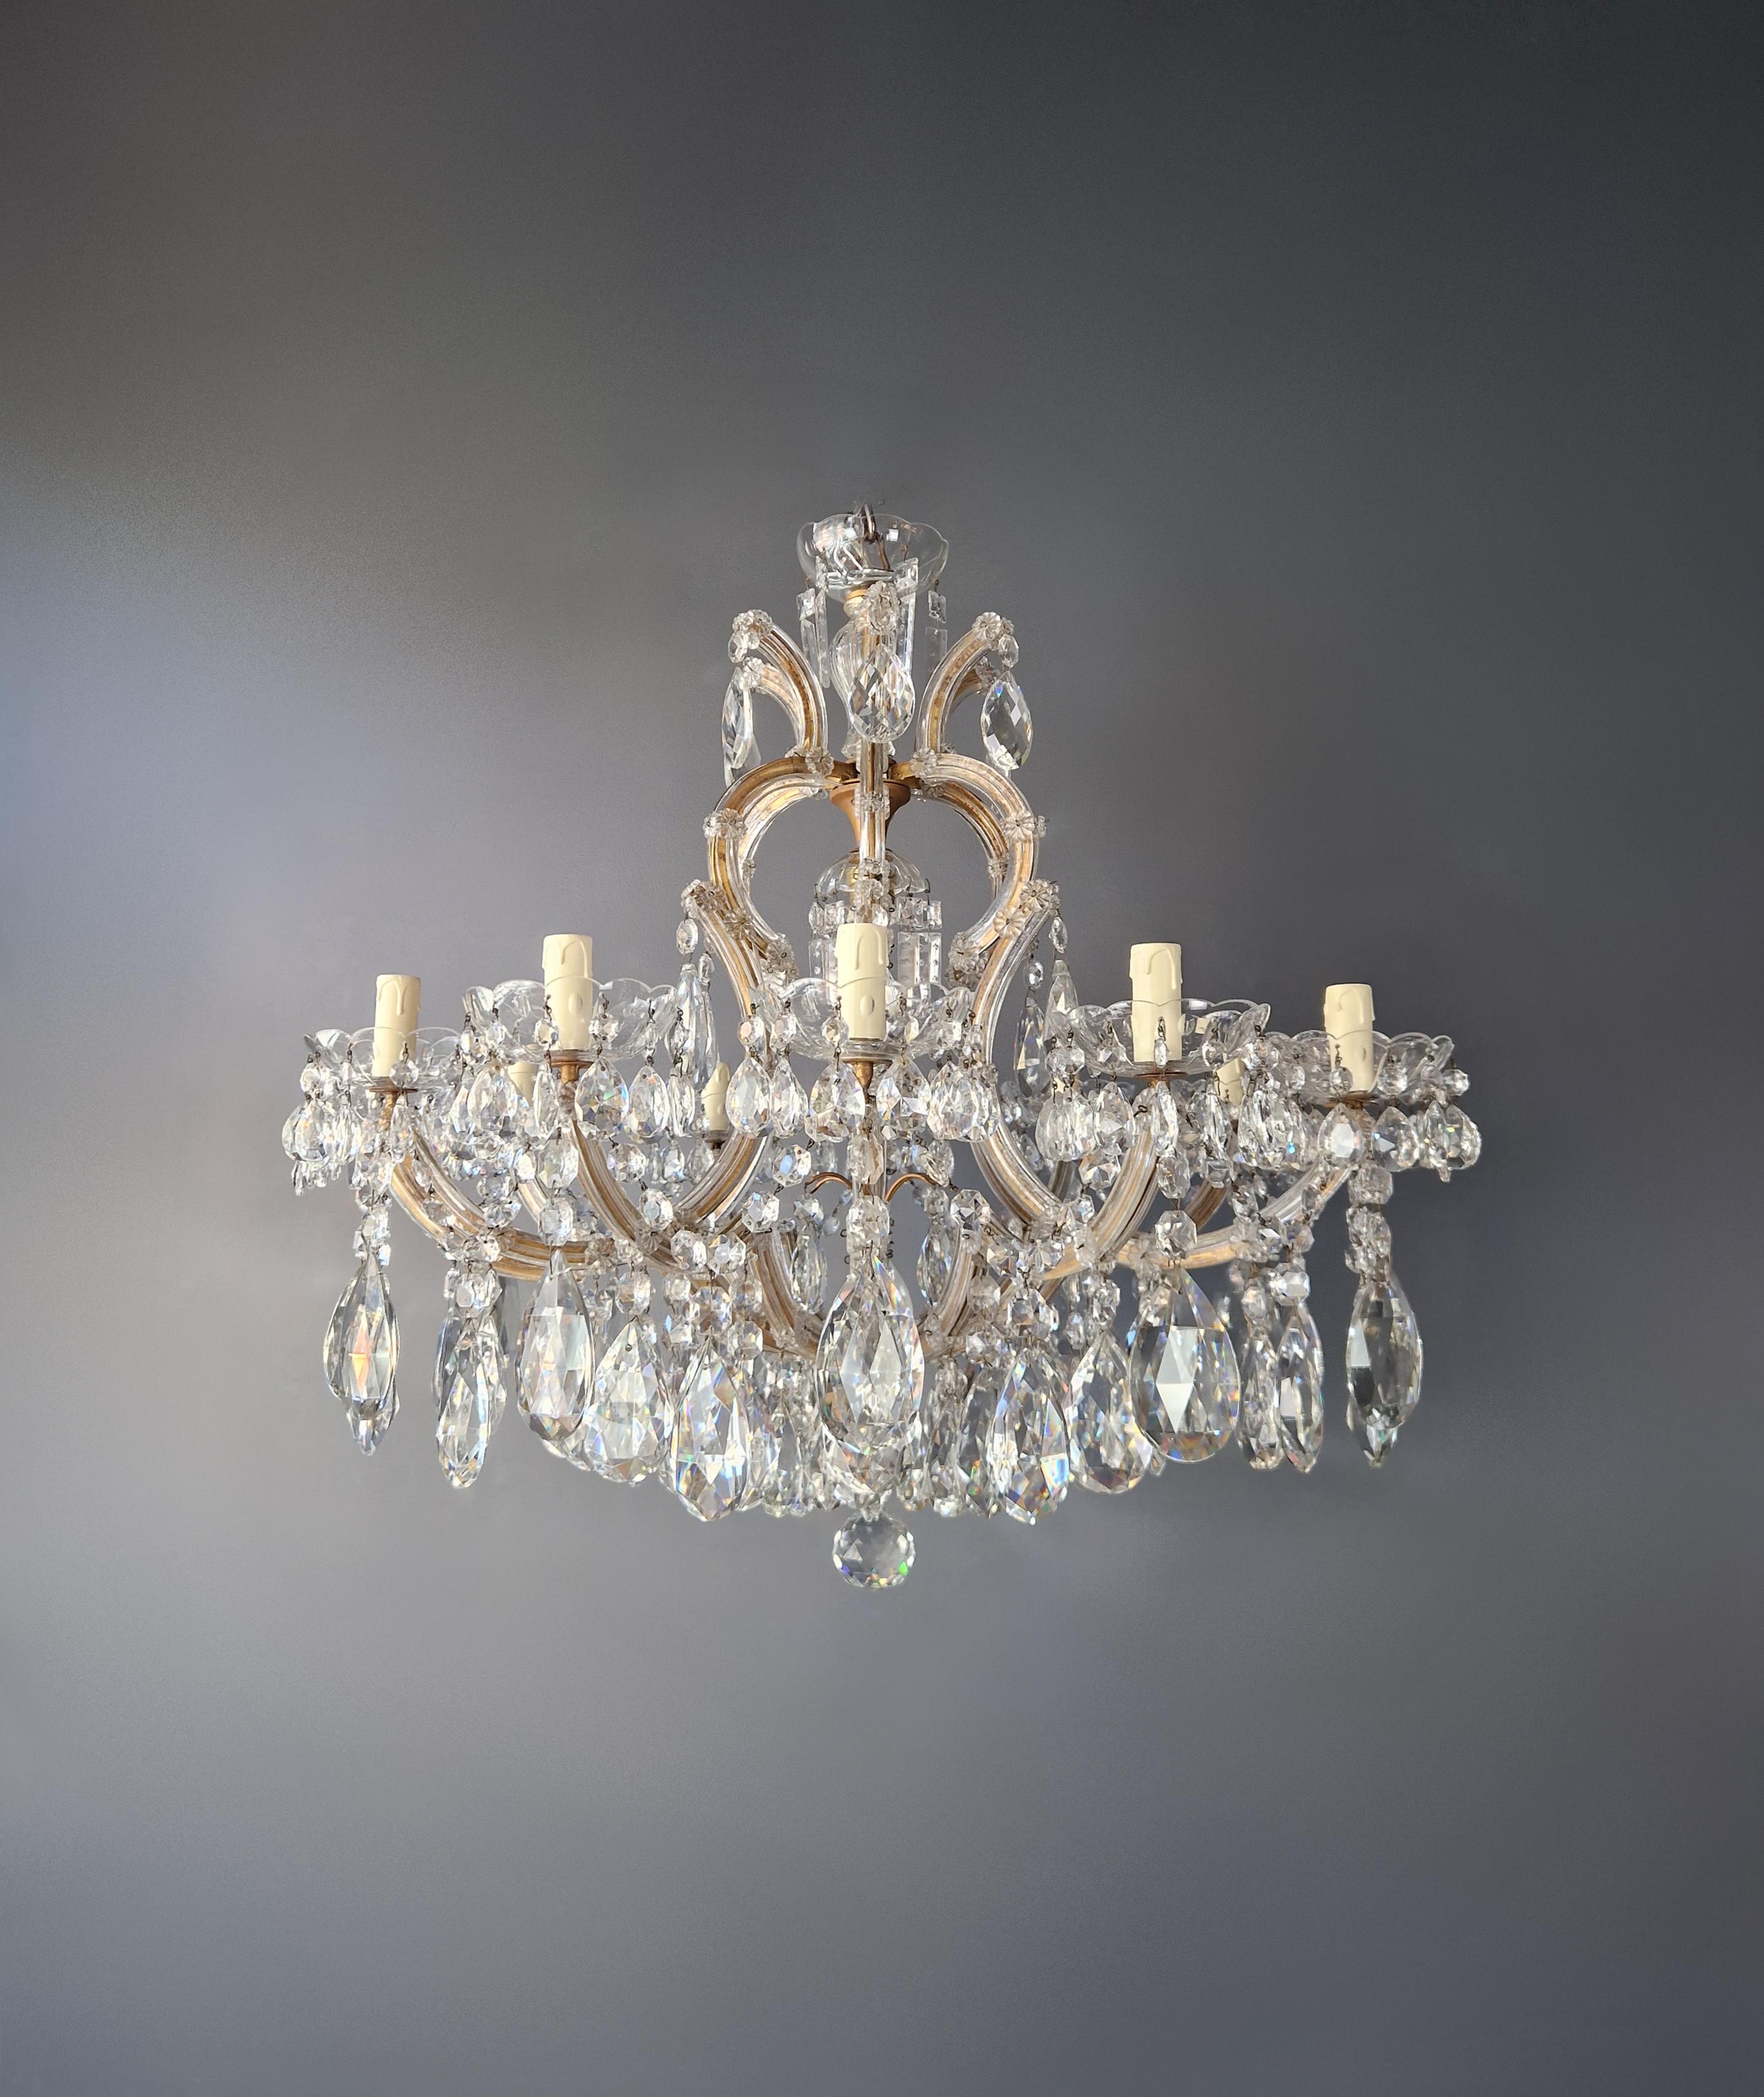 American Classical 1930s Art Nouveau Maria Theresa Crystal Chandelier lustre Brass Glass  For Sale